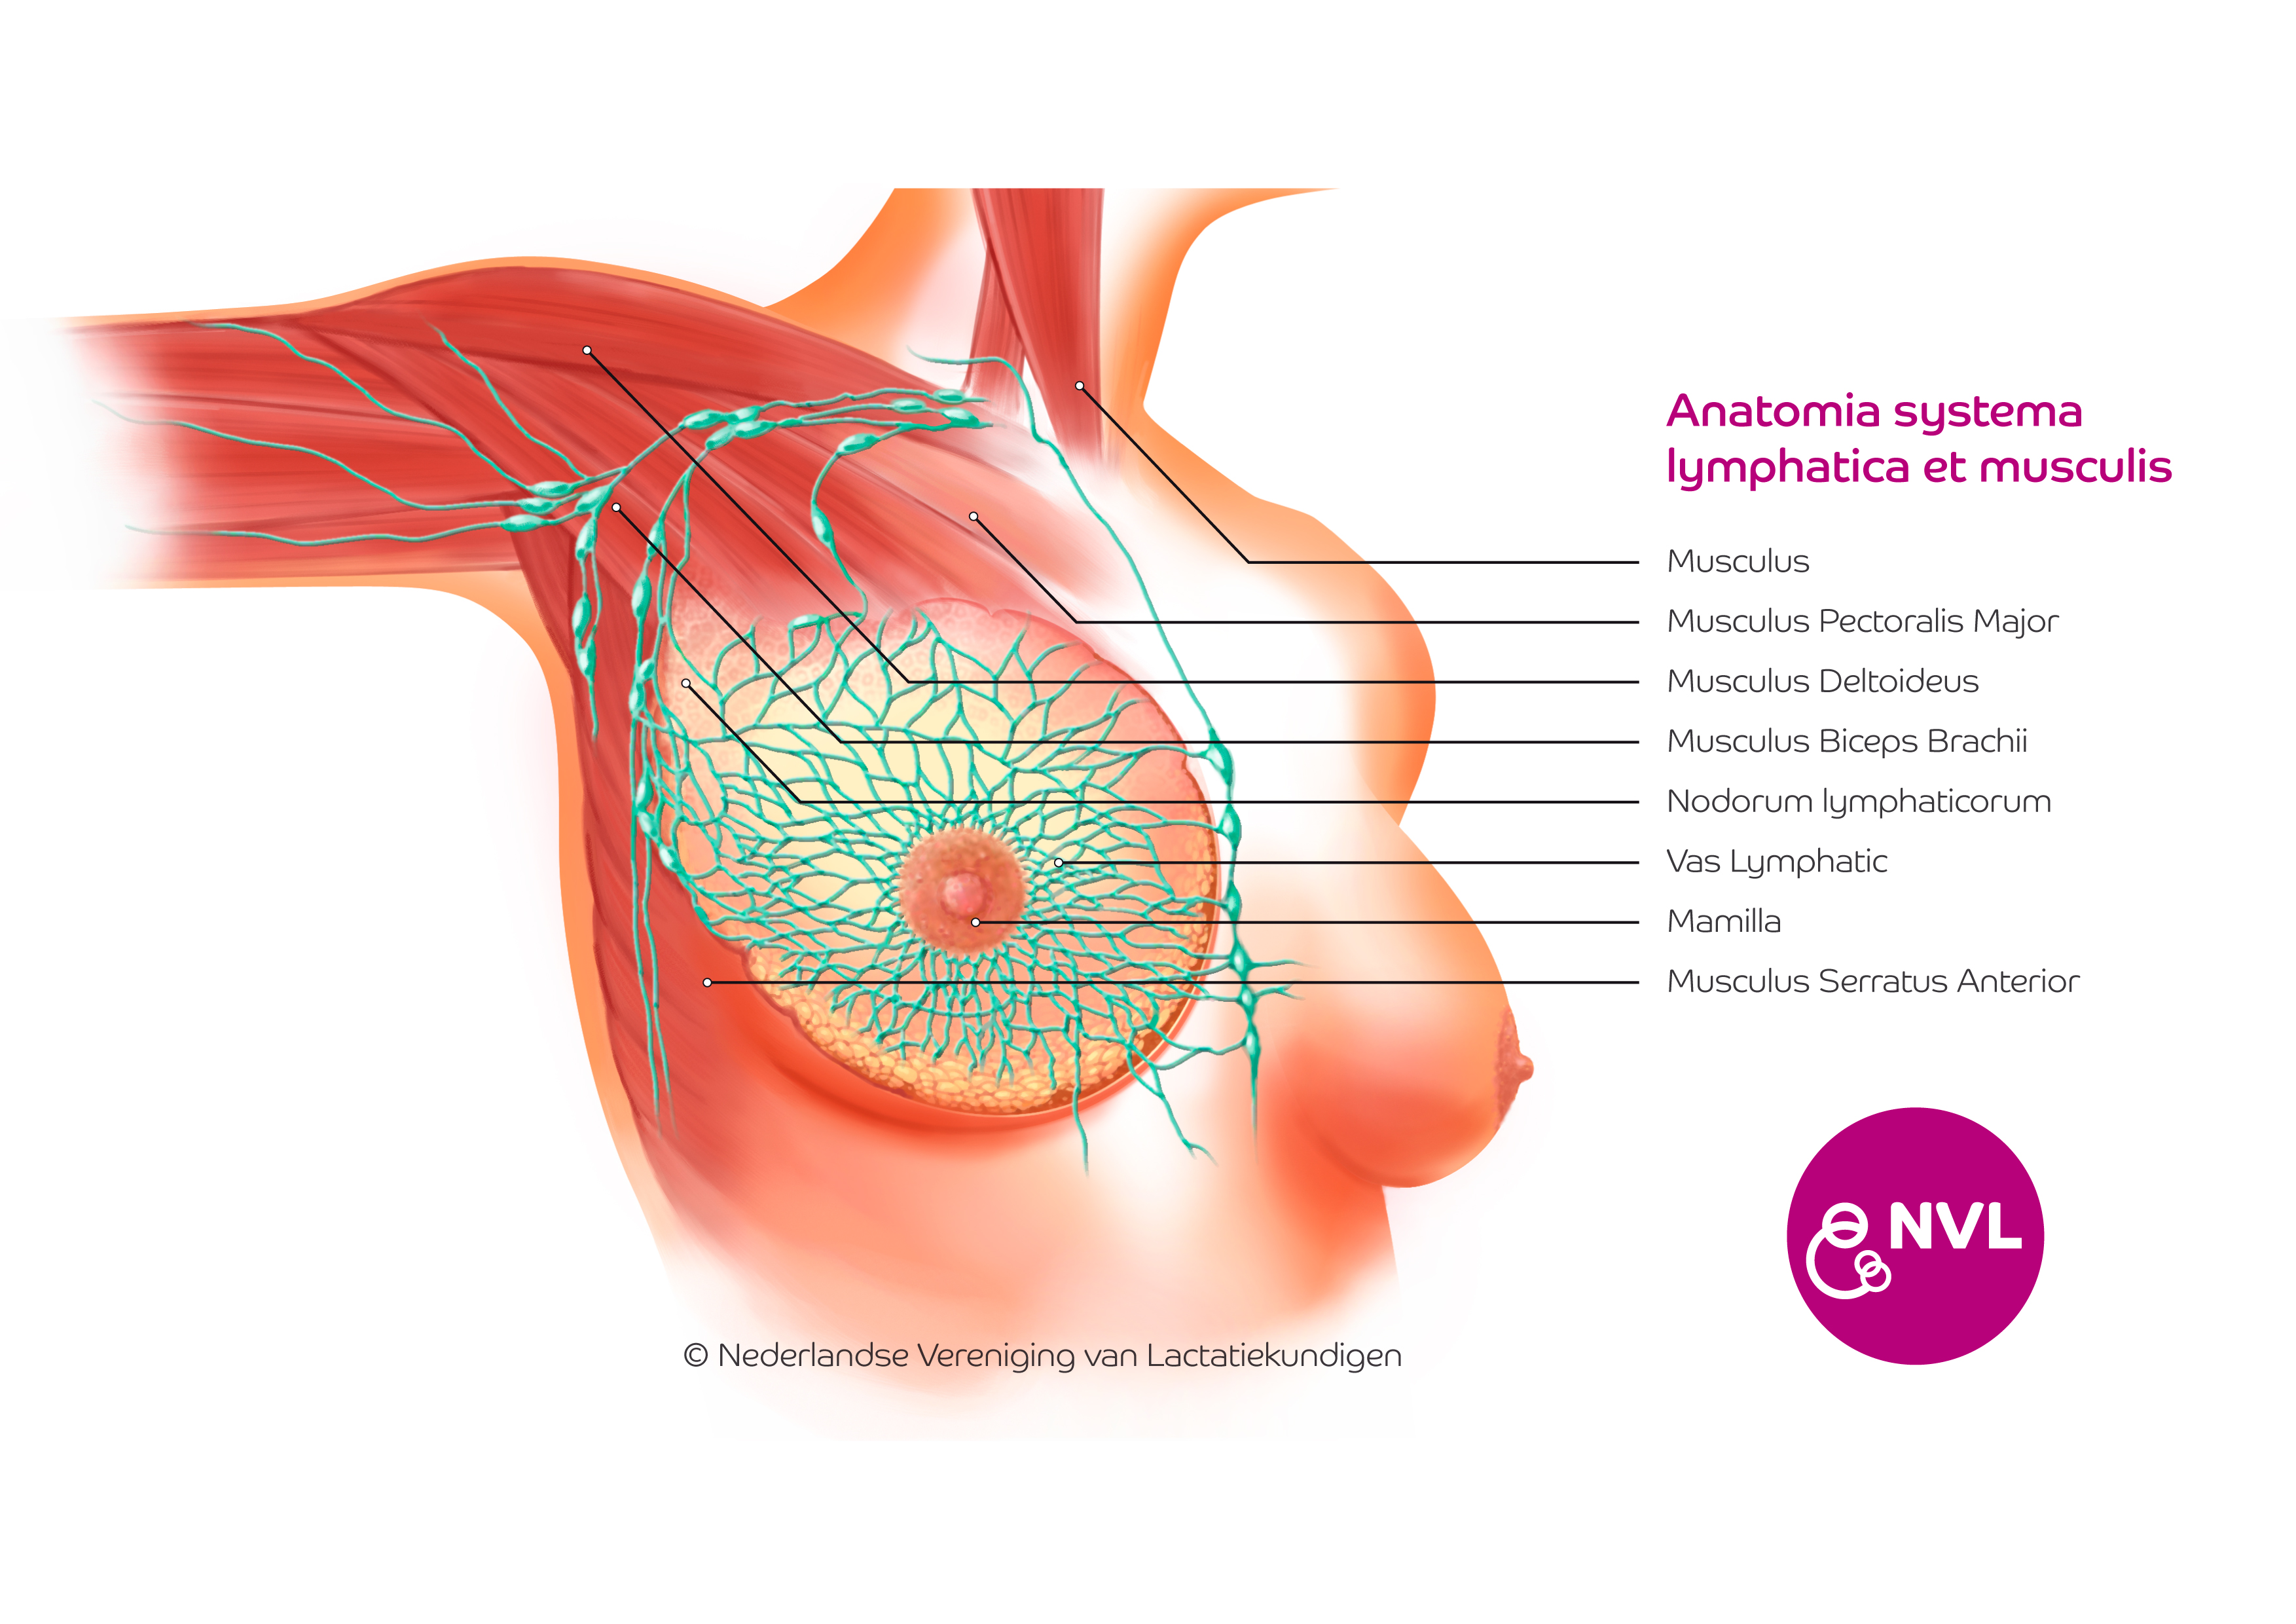 Anatomia systema lymphatica et musculis | NVL